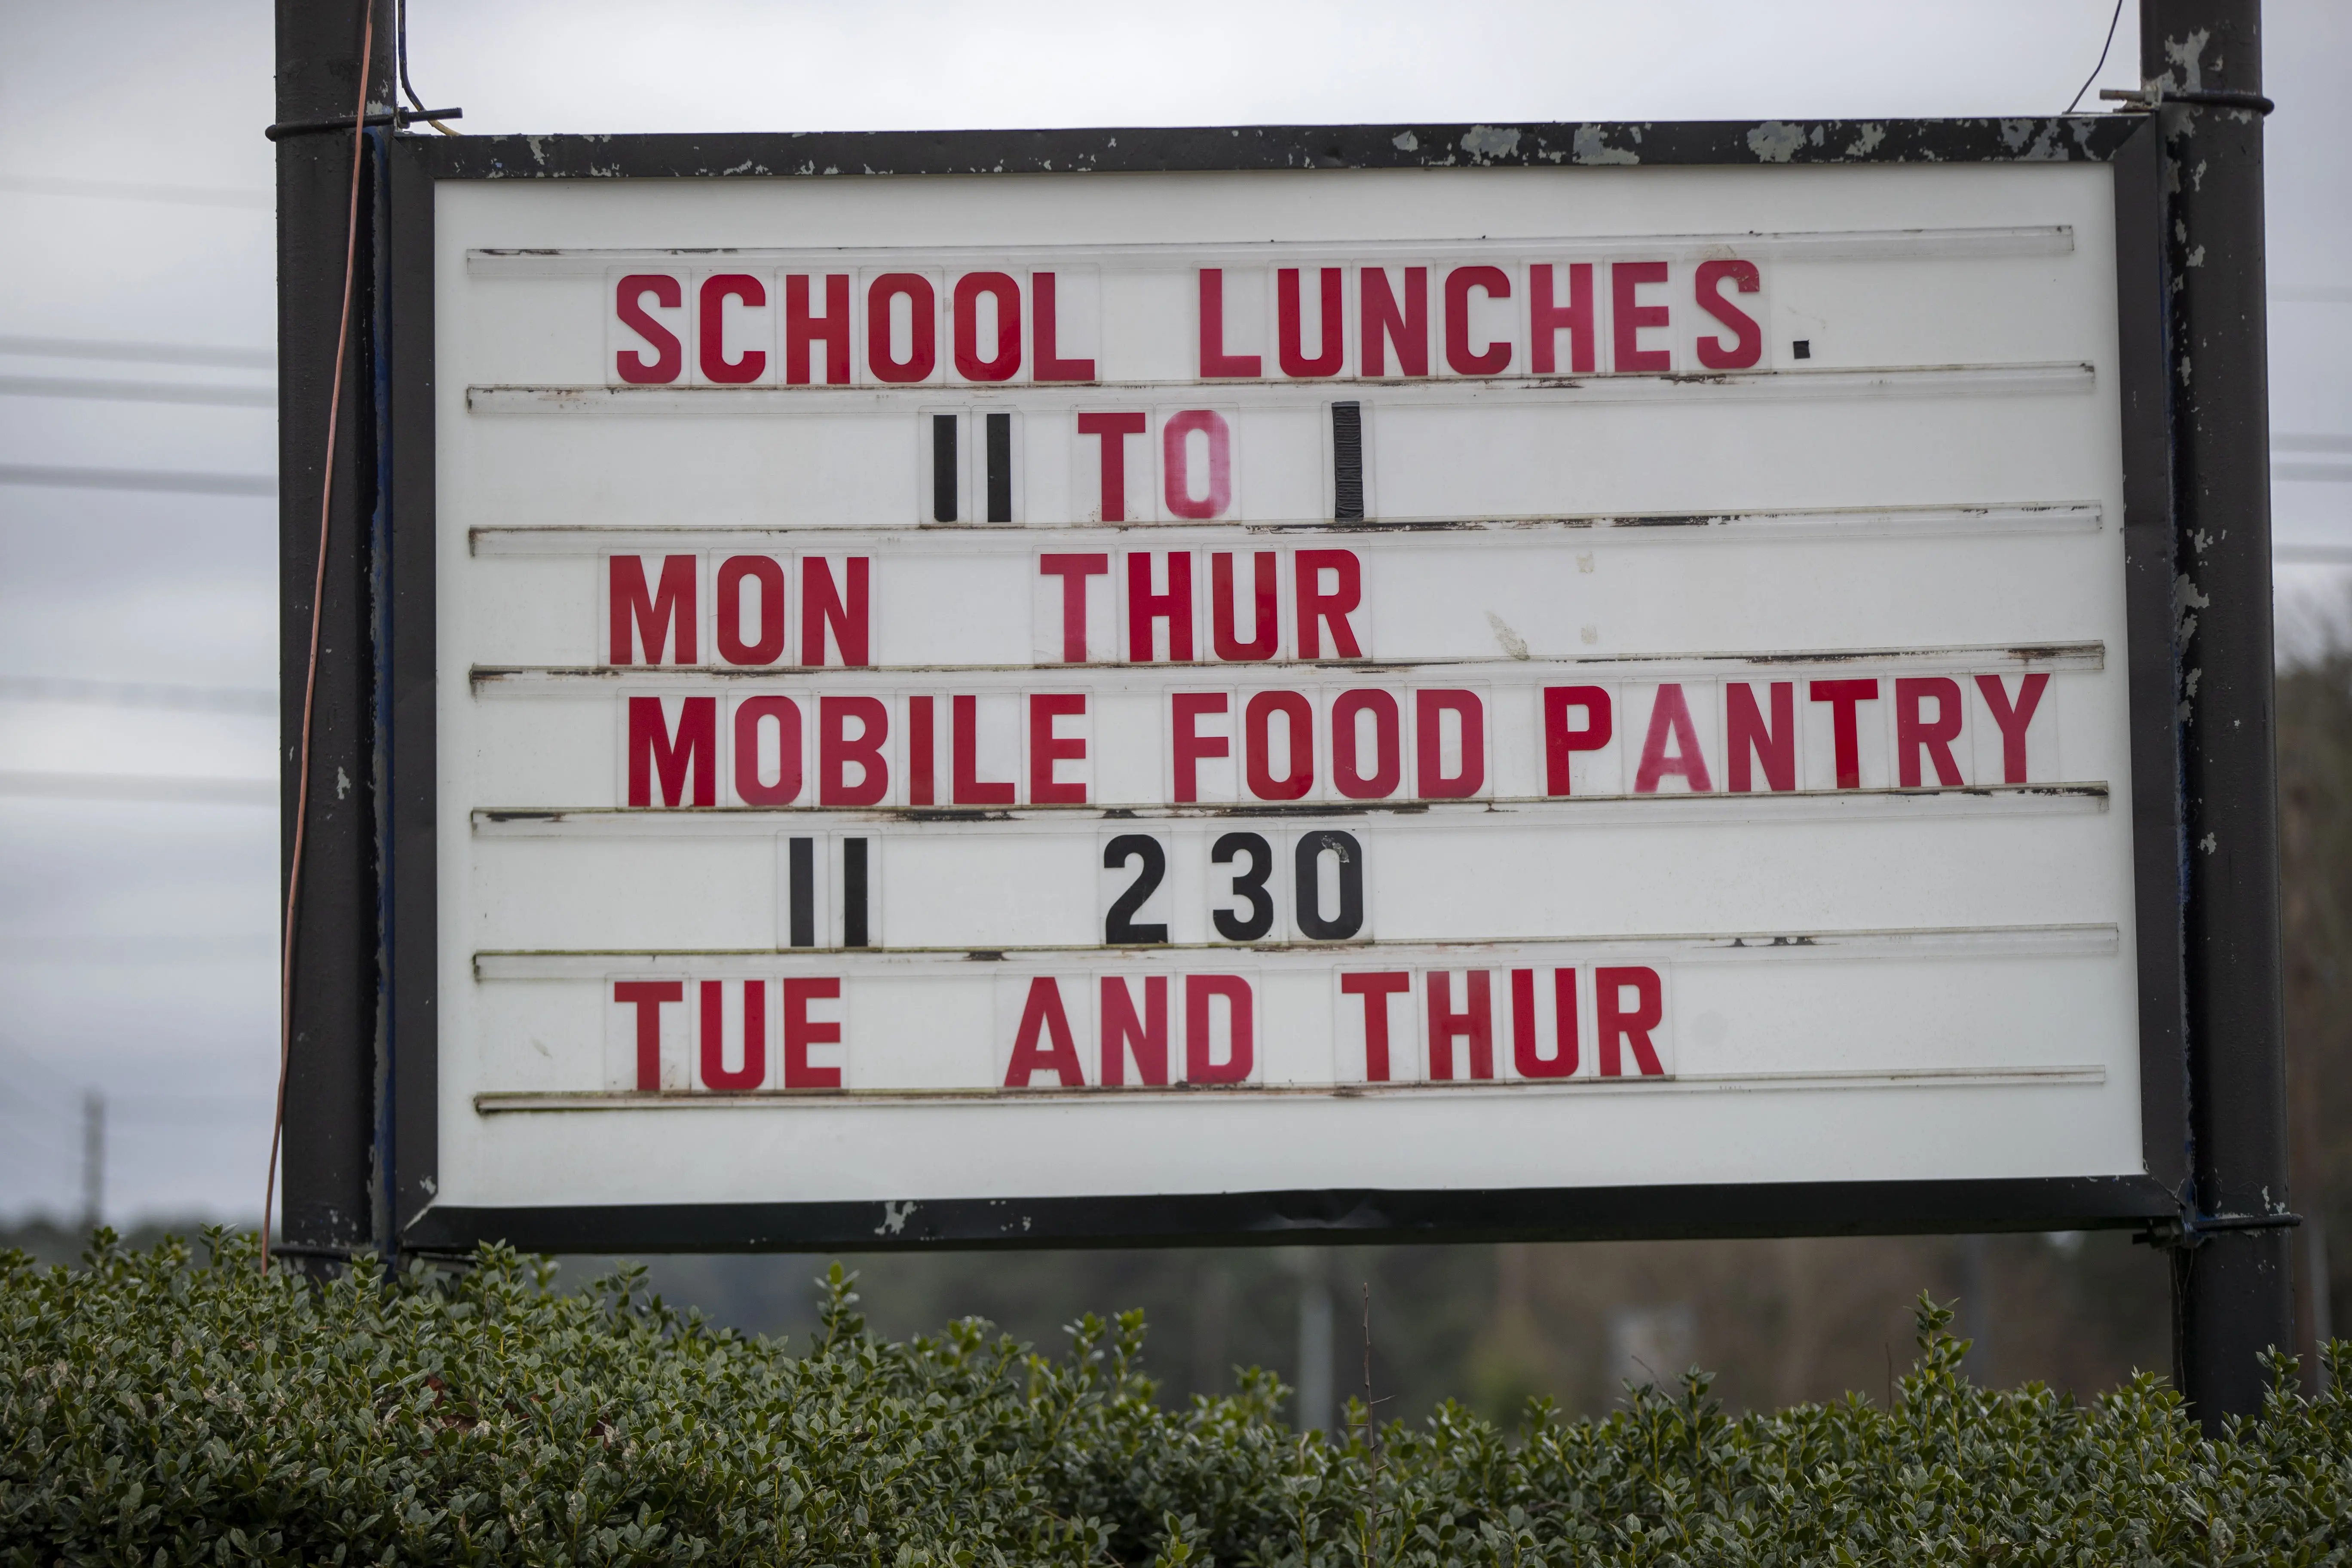 Sign reading "School lunches. 11 to 1 Mon Thur<br />
Mobile food pantry 11 to 2:30<br />
Tue and Thur